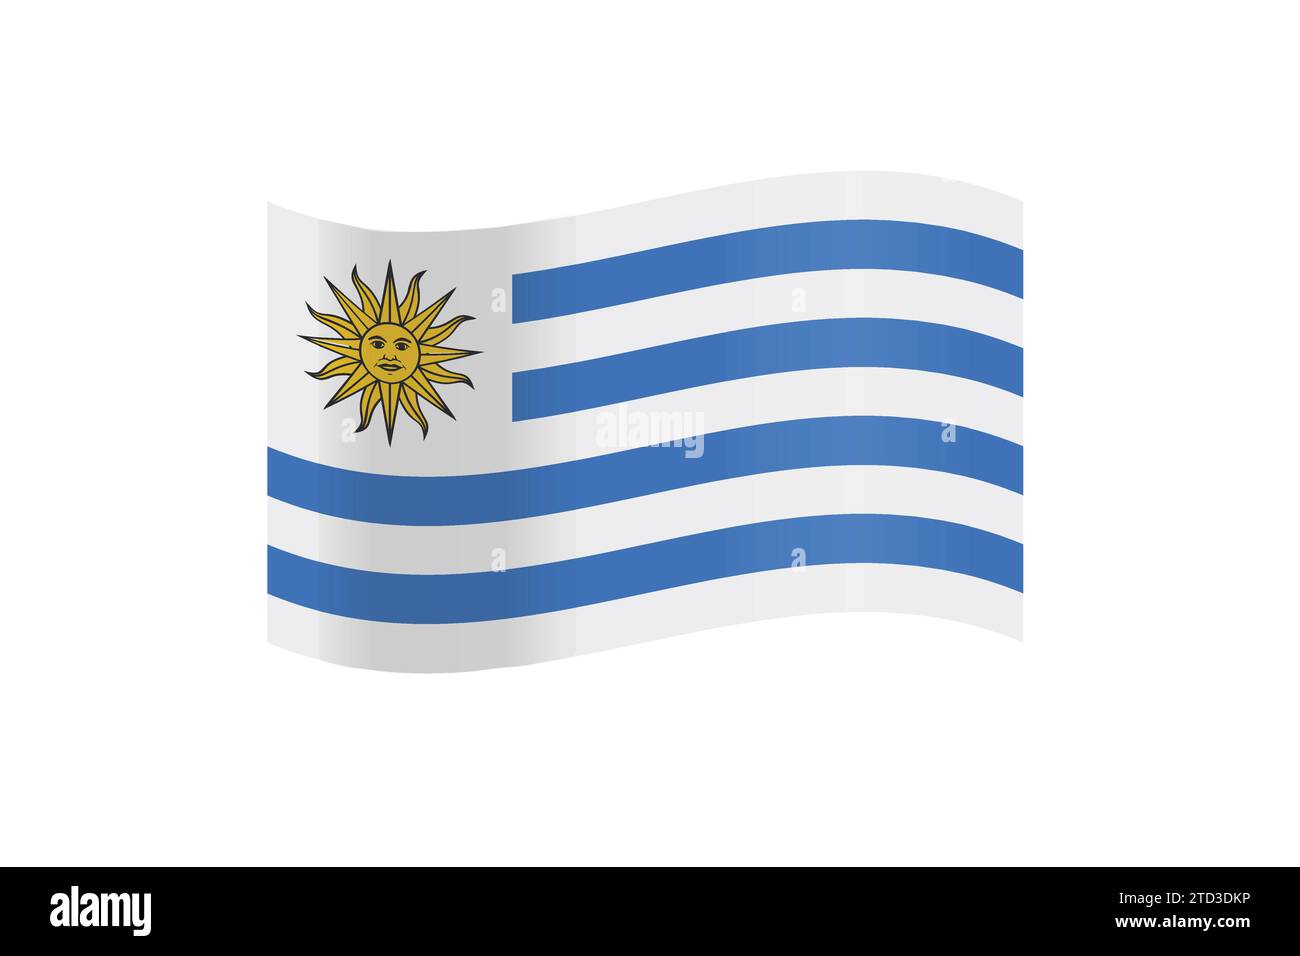 The flag of the Republic of Uruguay as a vector illustration Stock Vector